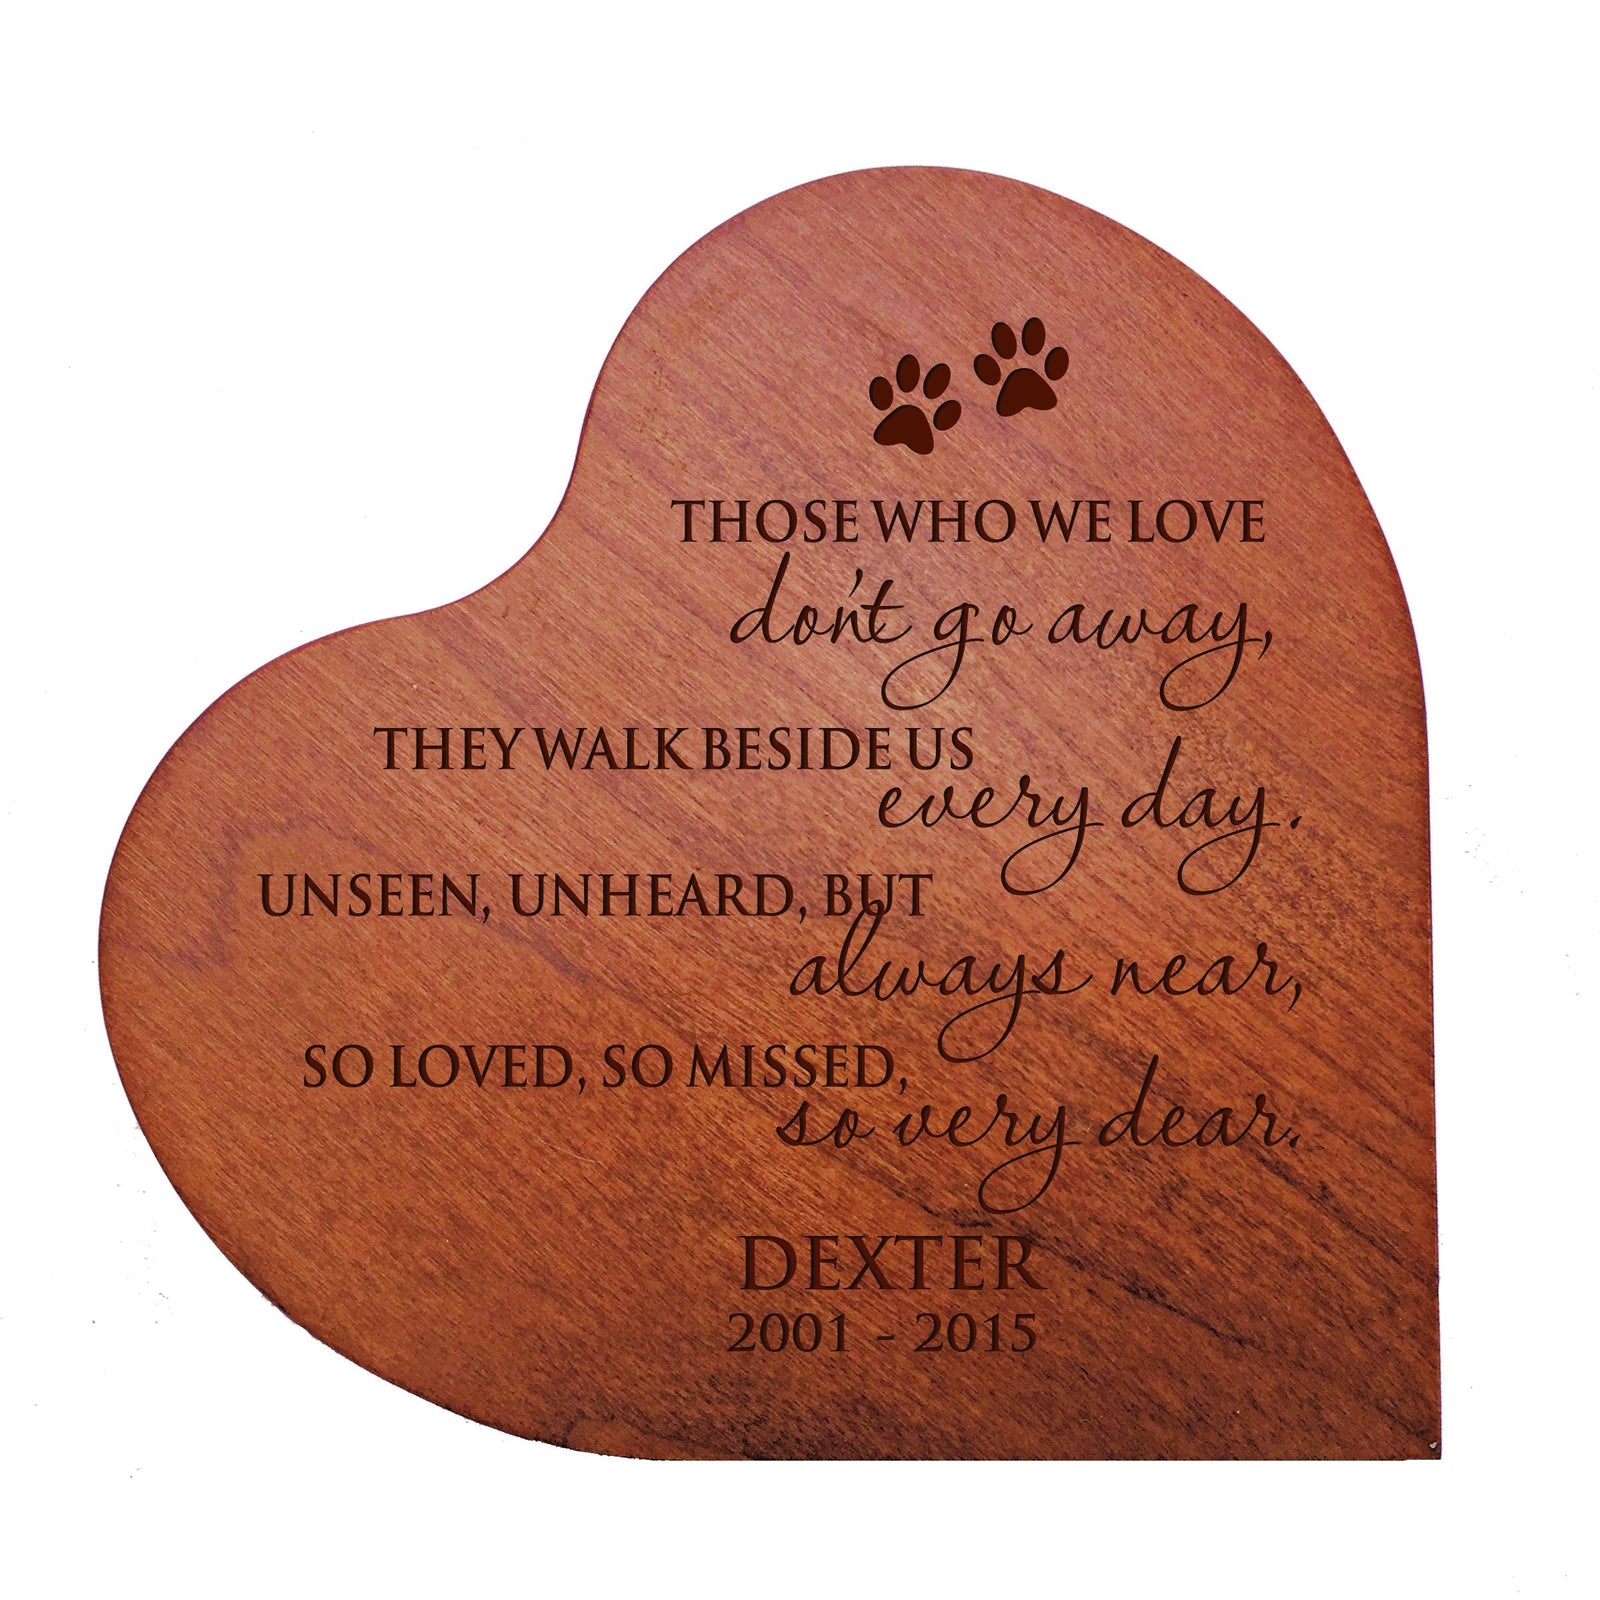 Cherry Pet Memorial Heart Block Decor with phrase "Those Who We Love"